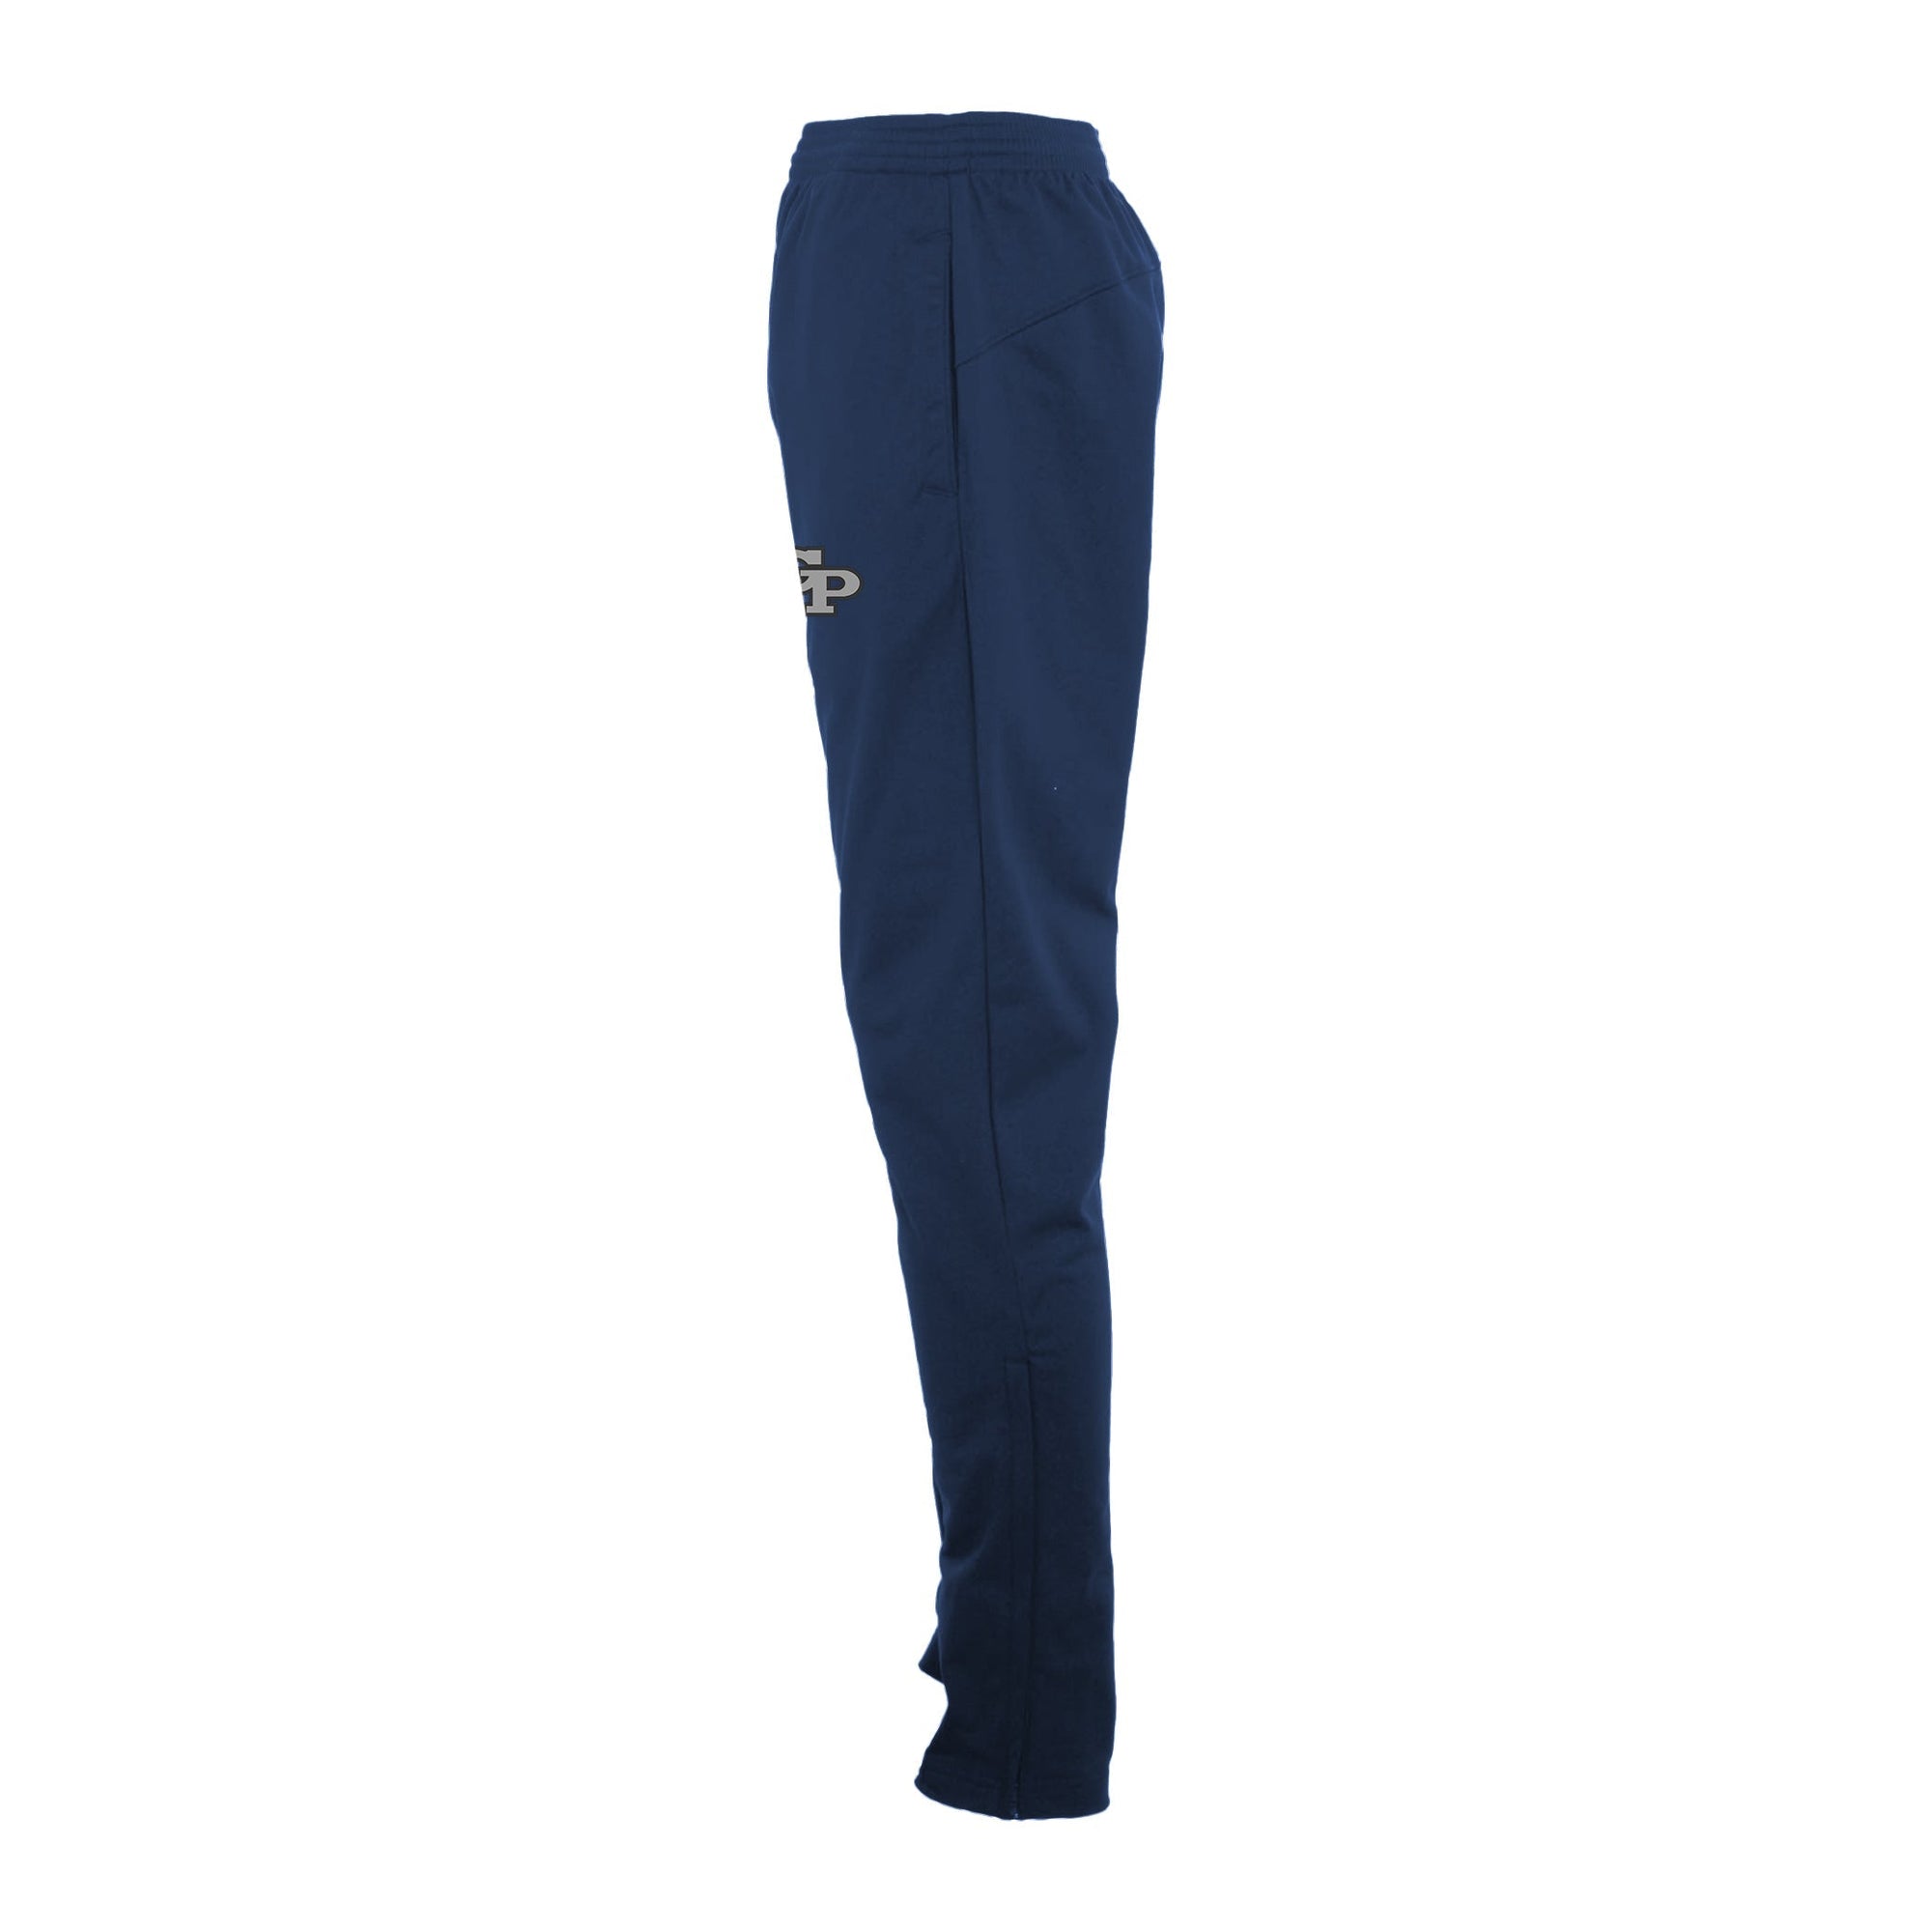 Rugby Imports Georgetown Prep Unisex Tapered Leg Pant